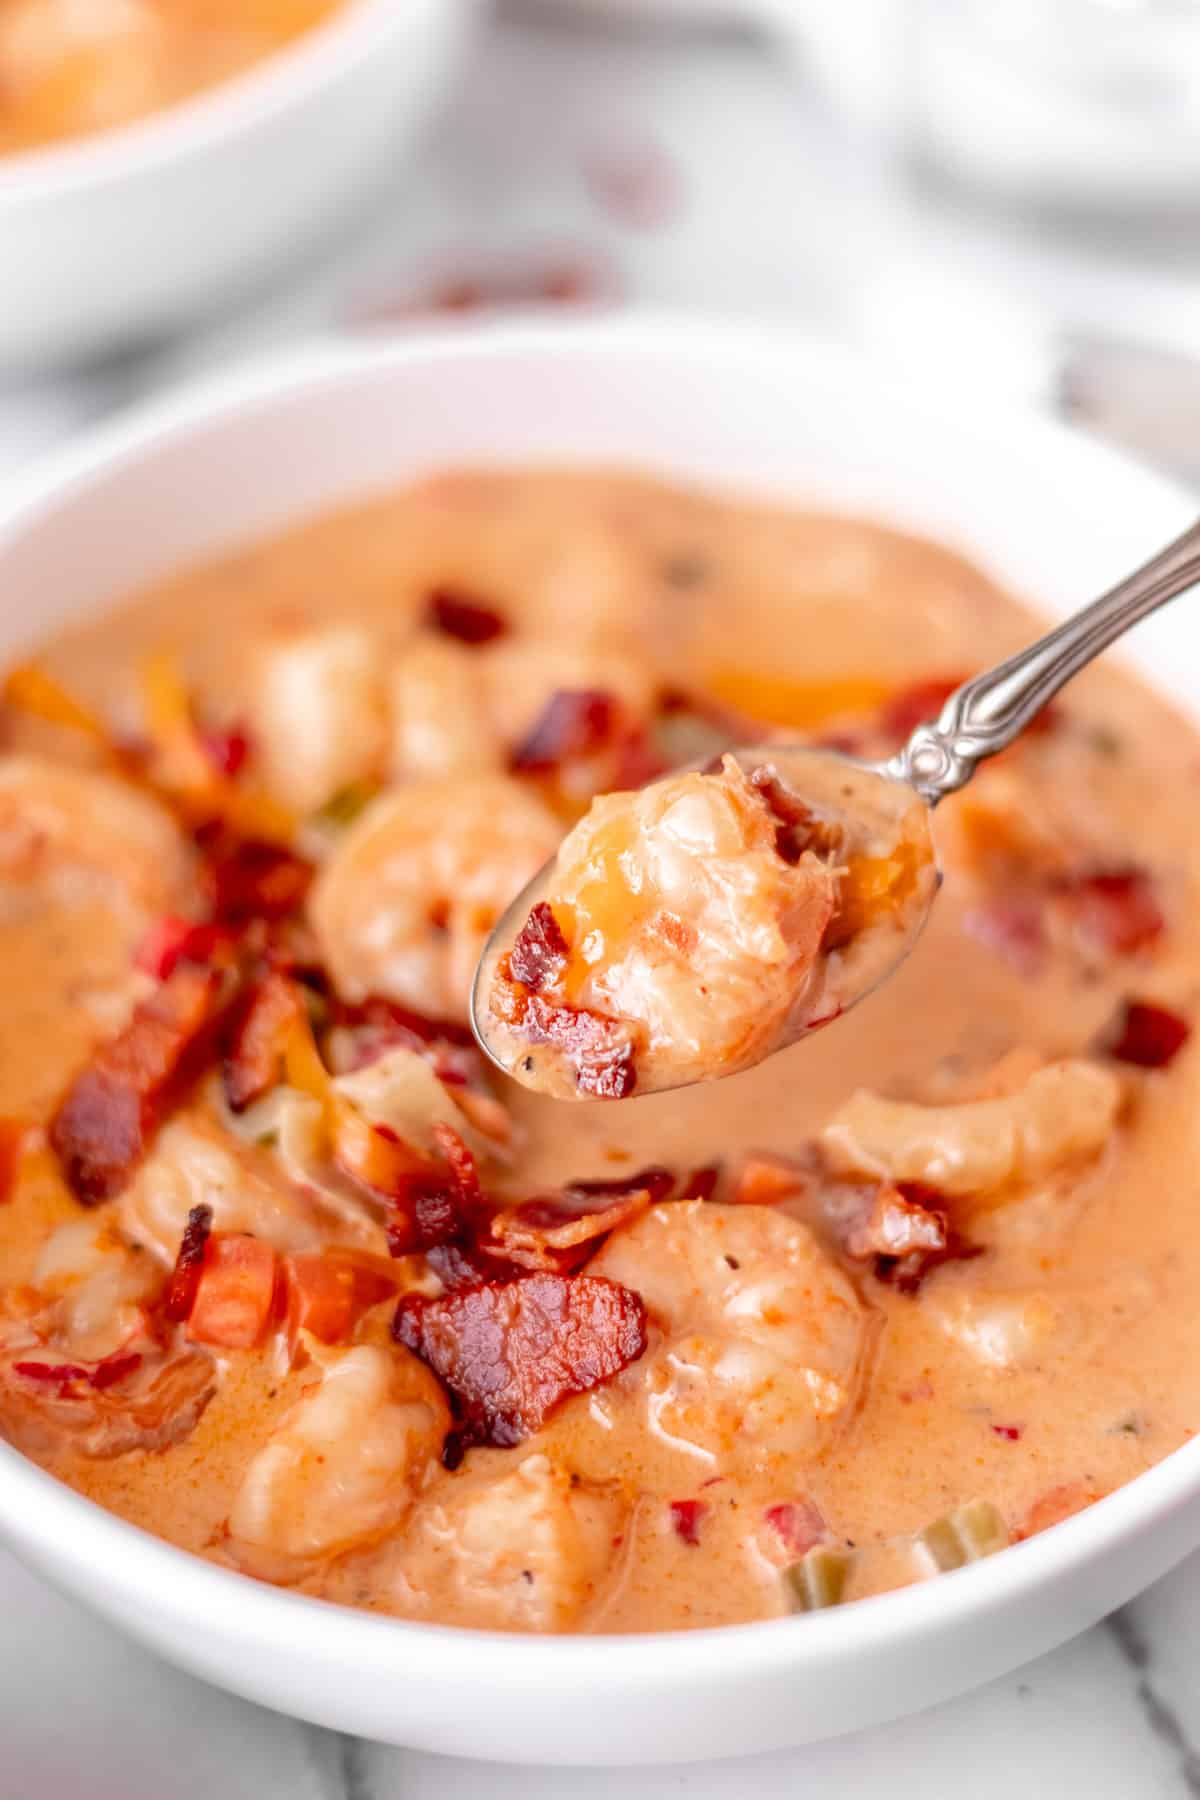 A spoon lifting up a bite of creamy shrimp chowder over the bowl of more soup.